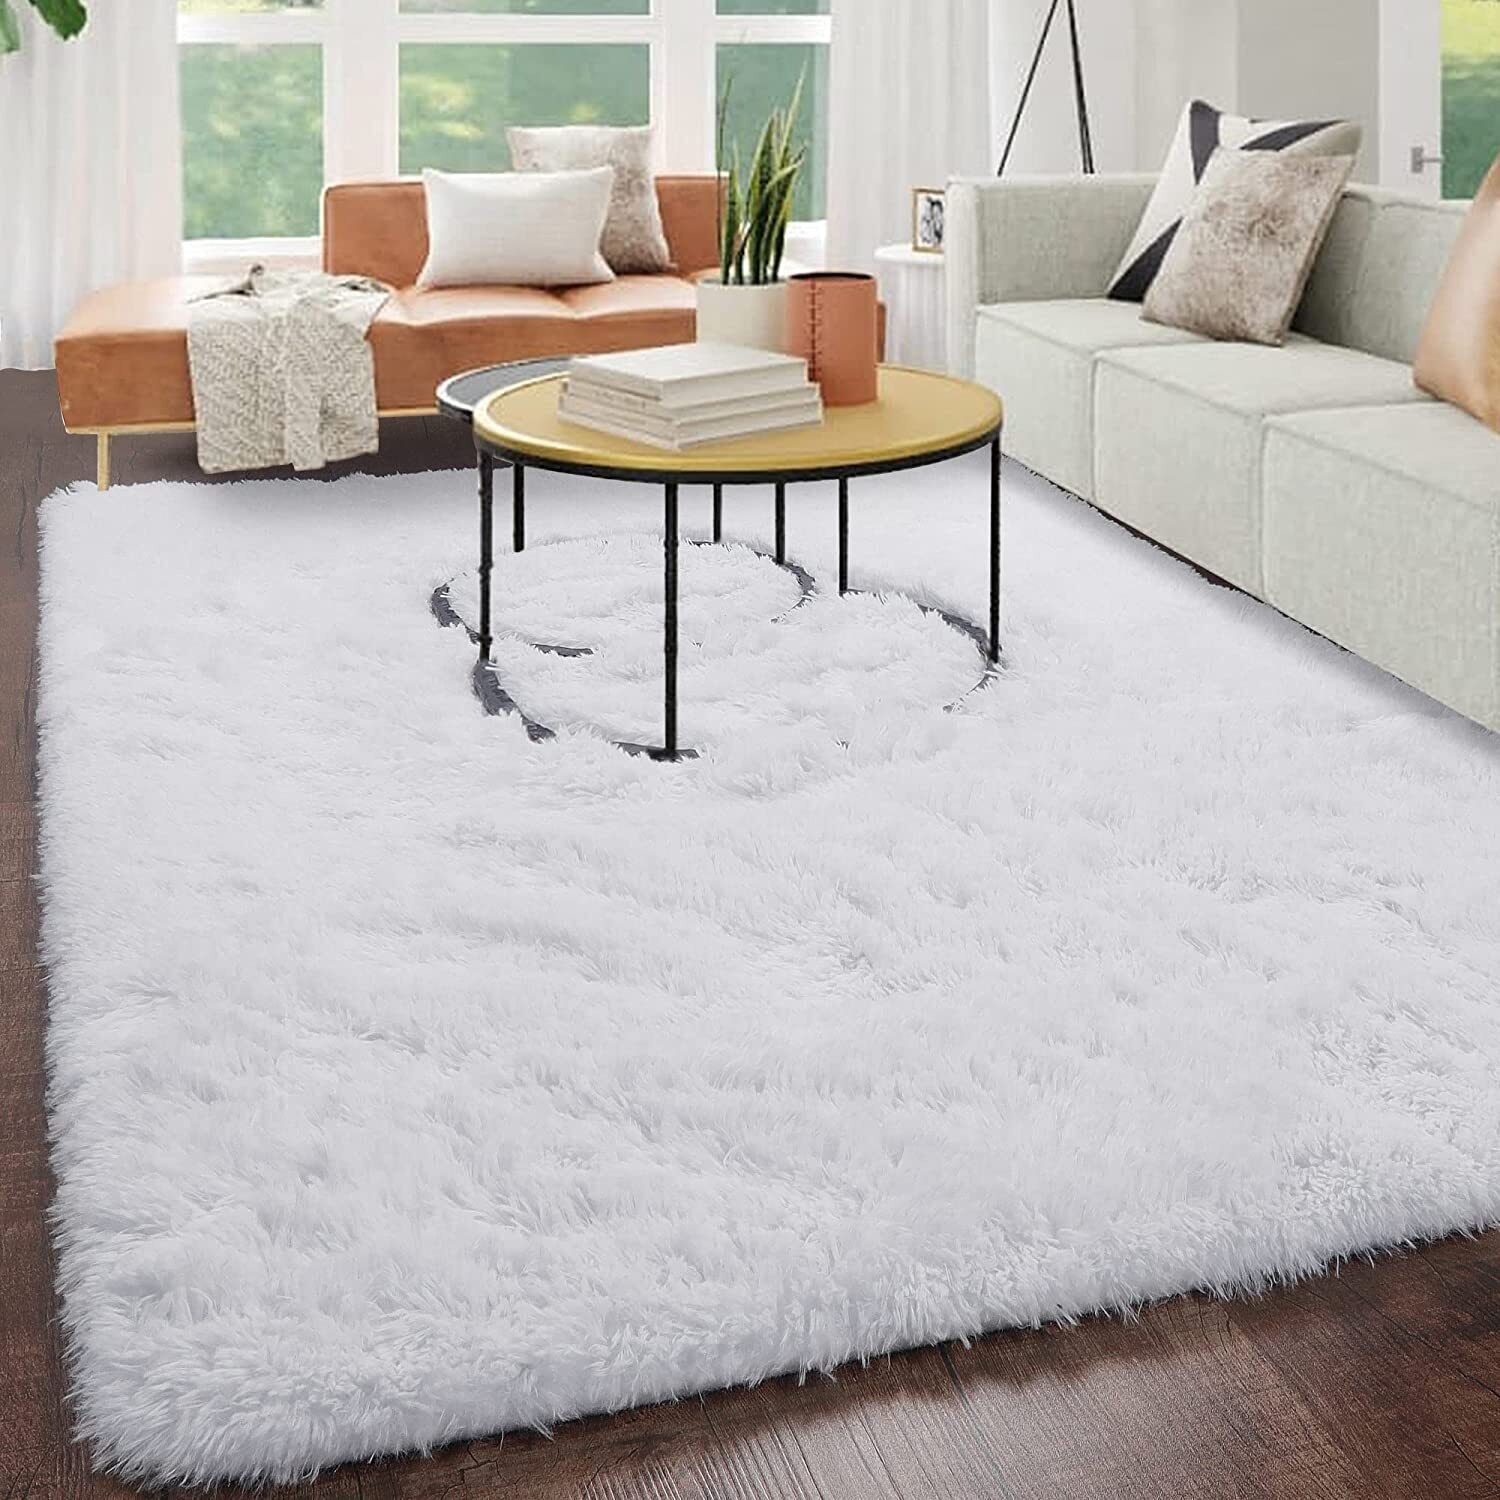 White Rugs For Bedroom,5X8 Rug,Soft Fluffy Area Rugs For Living Room,White  Carpe 313051442430 | Ebay With White Soft Rugs (Photo 3 of 15)